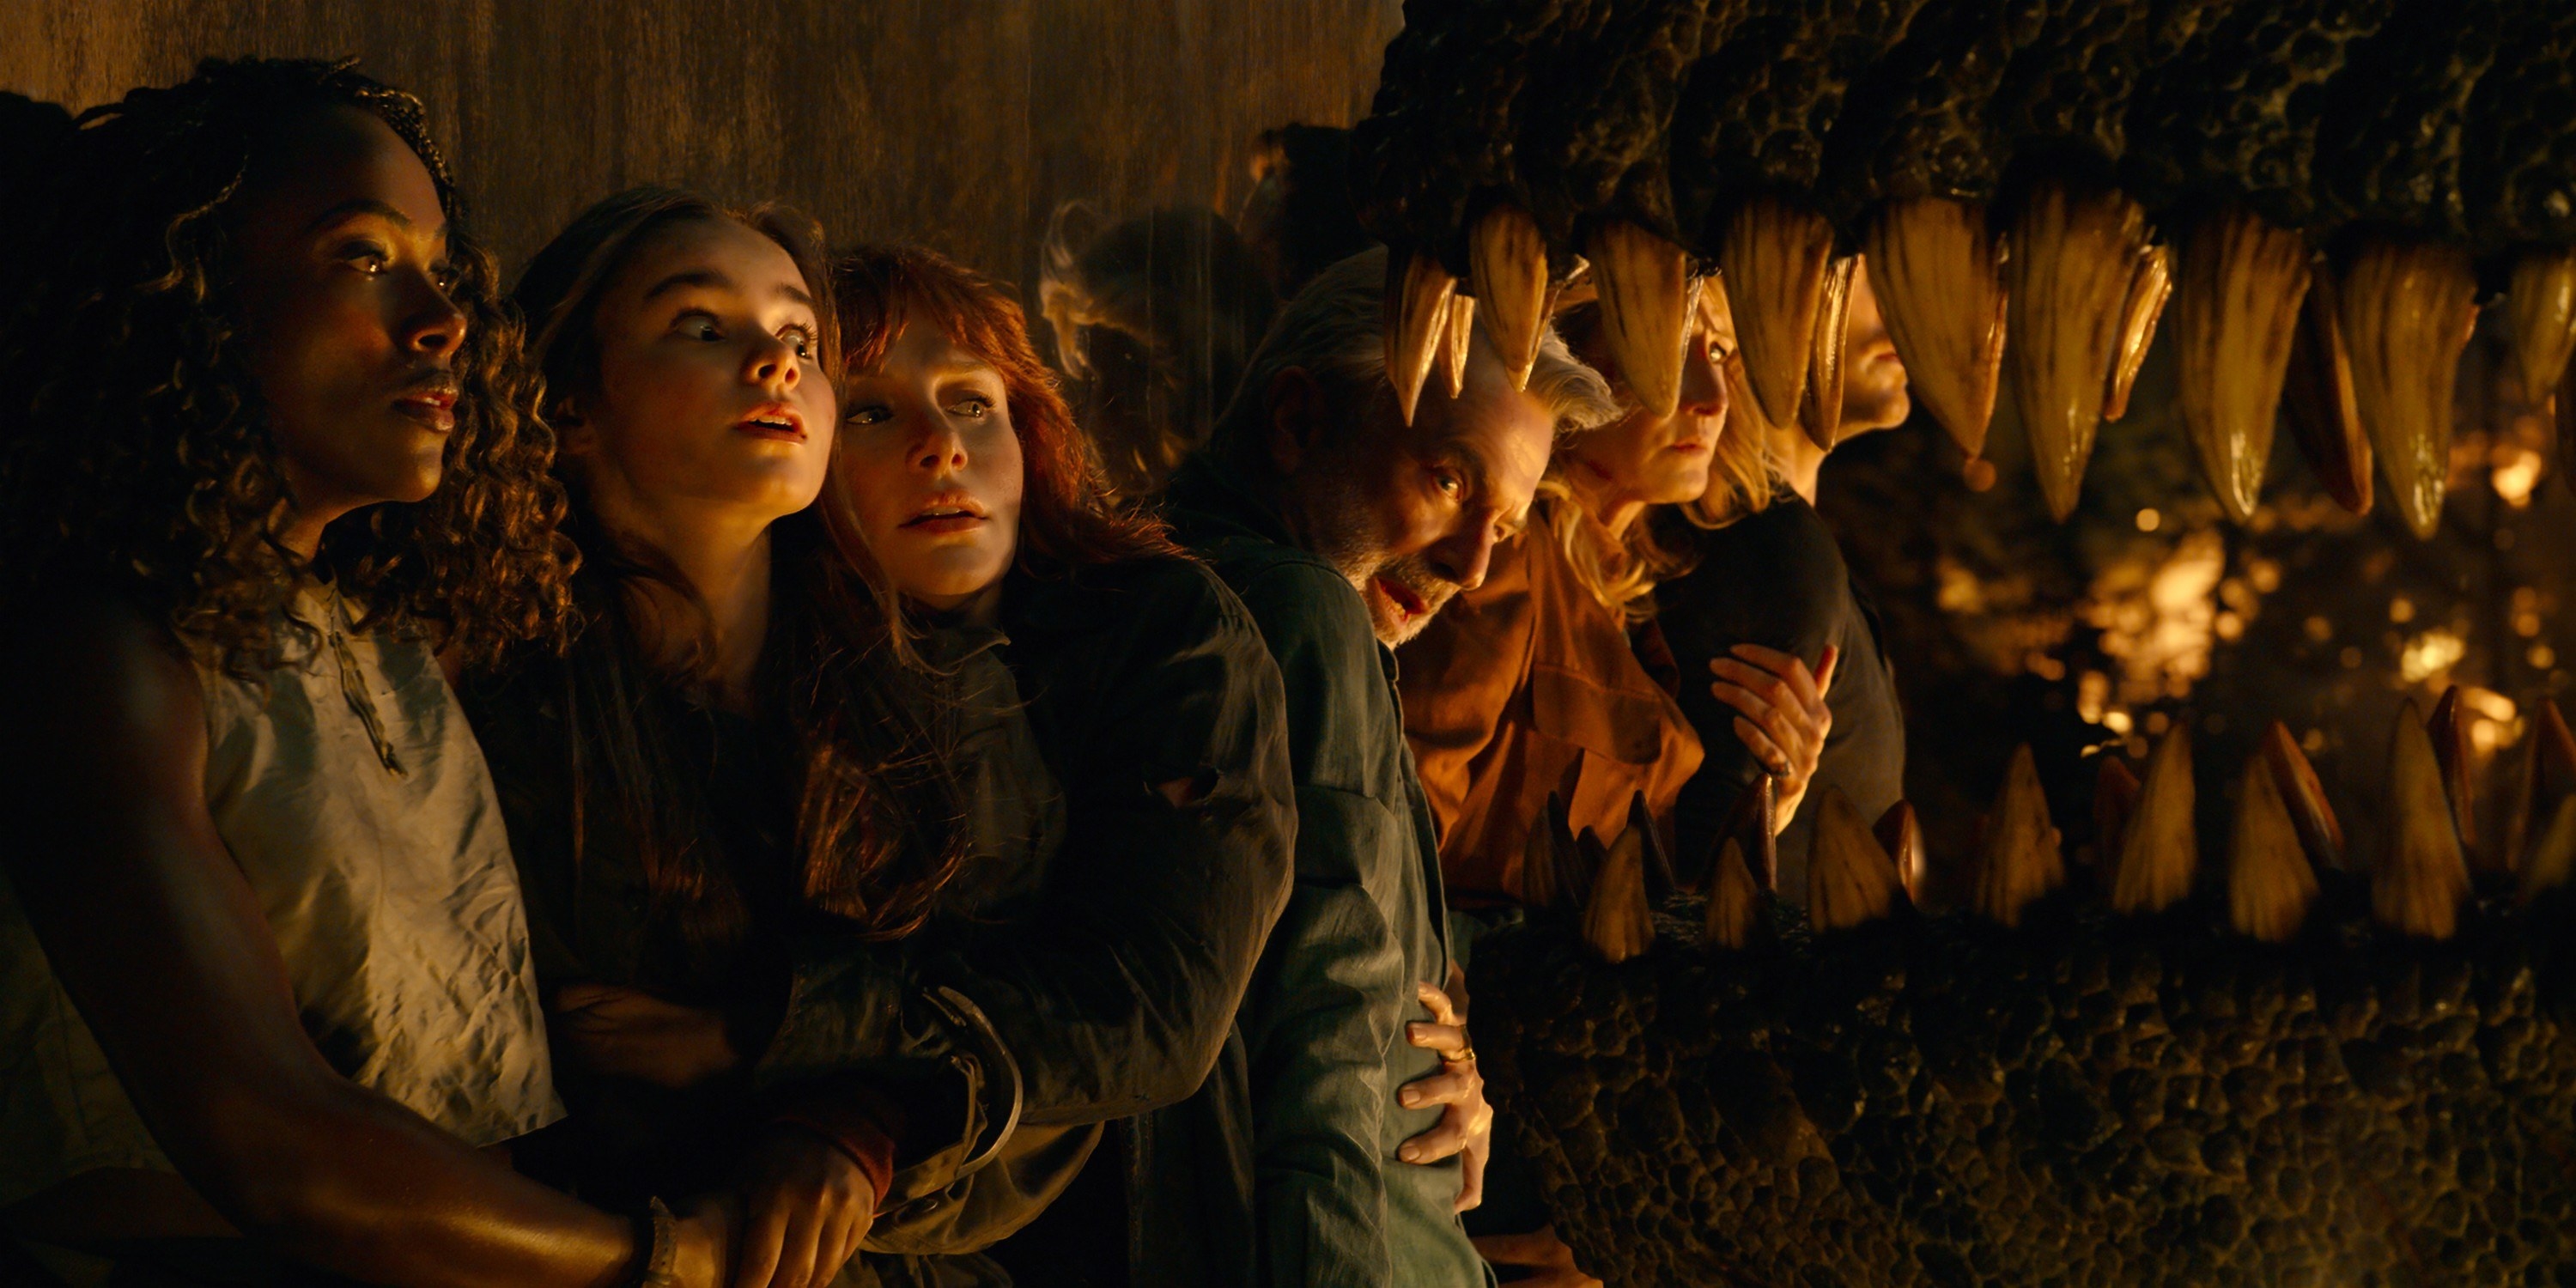 Three women in the film hugging each other in fear